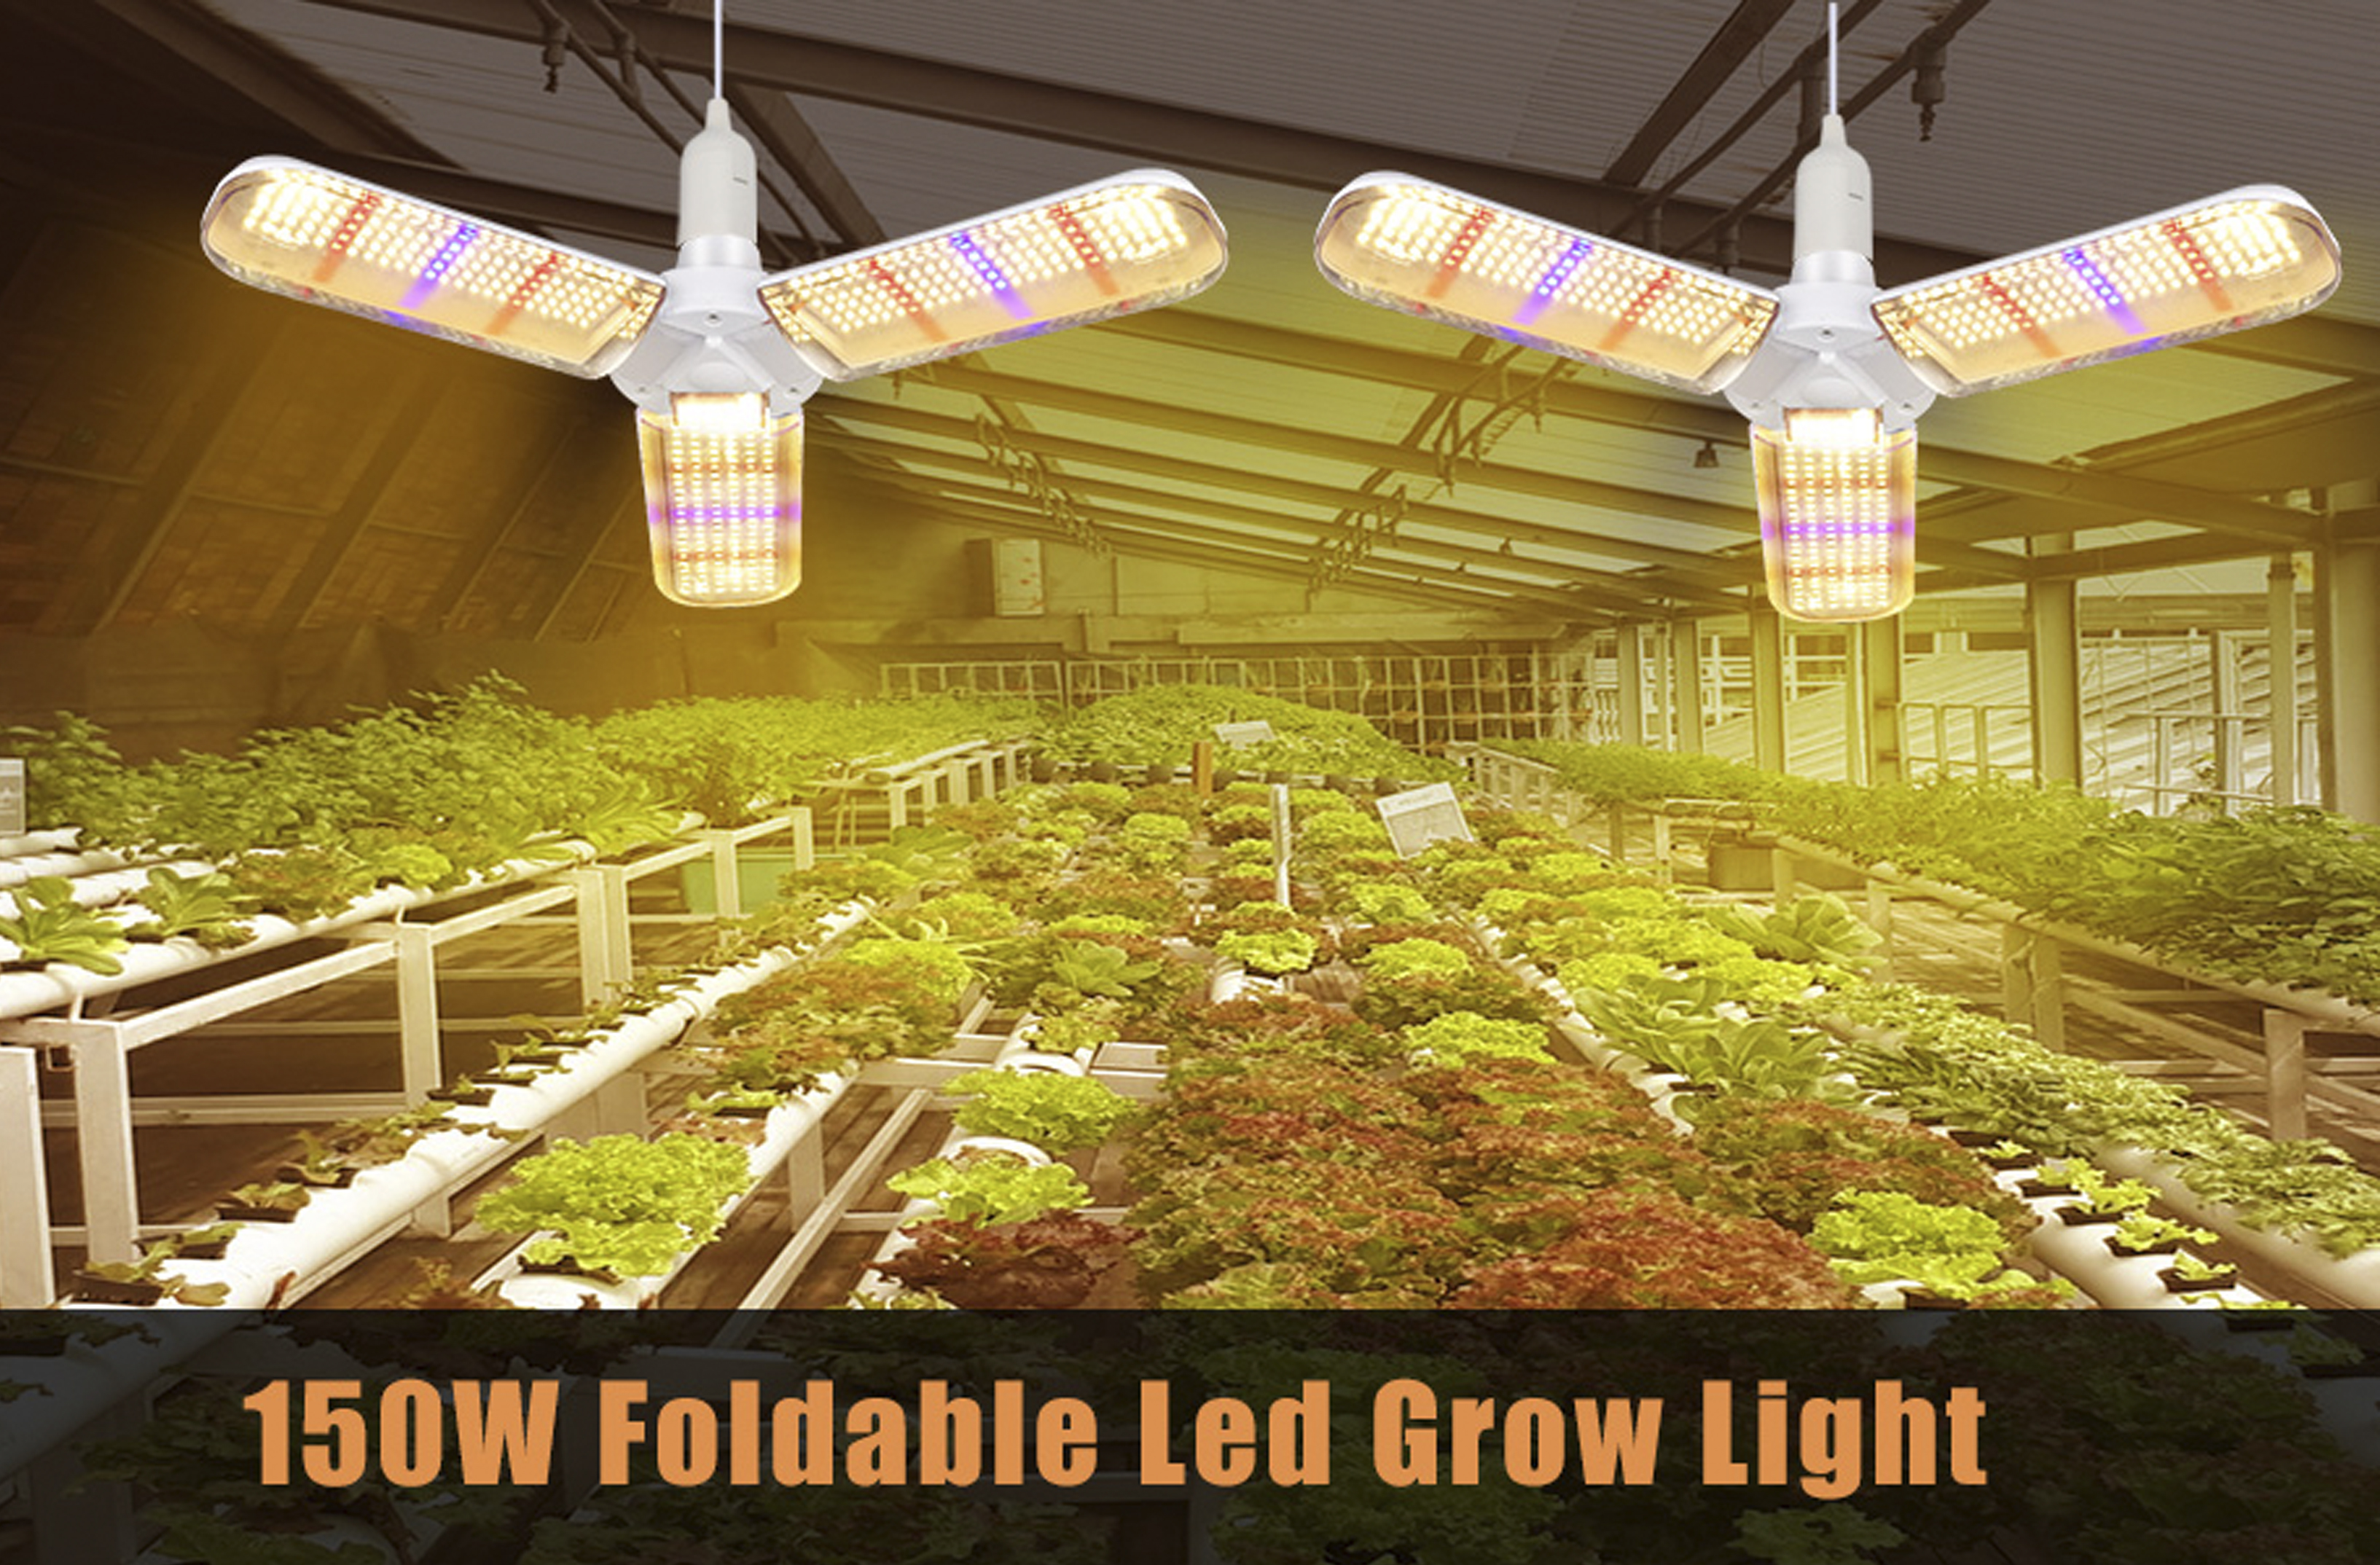 ROOMLUX brought out new plant lamp growth lamp